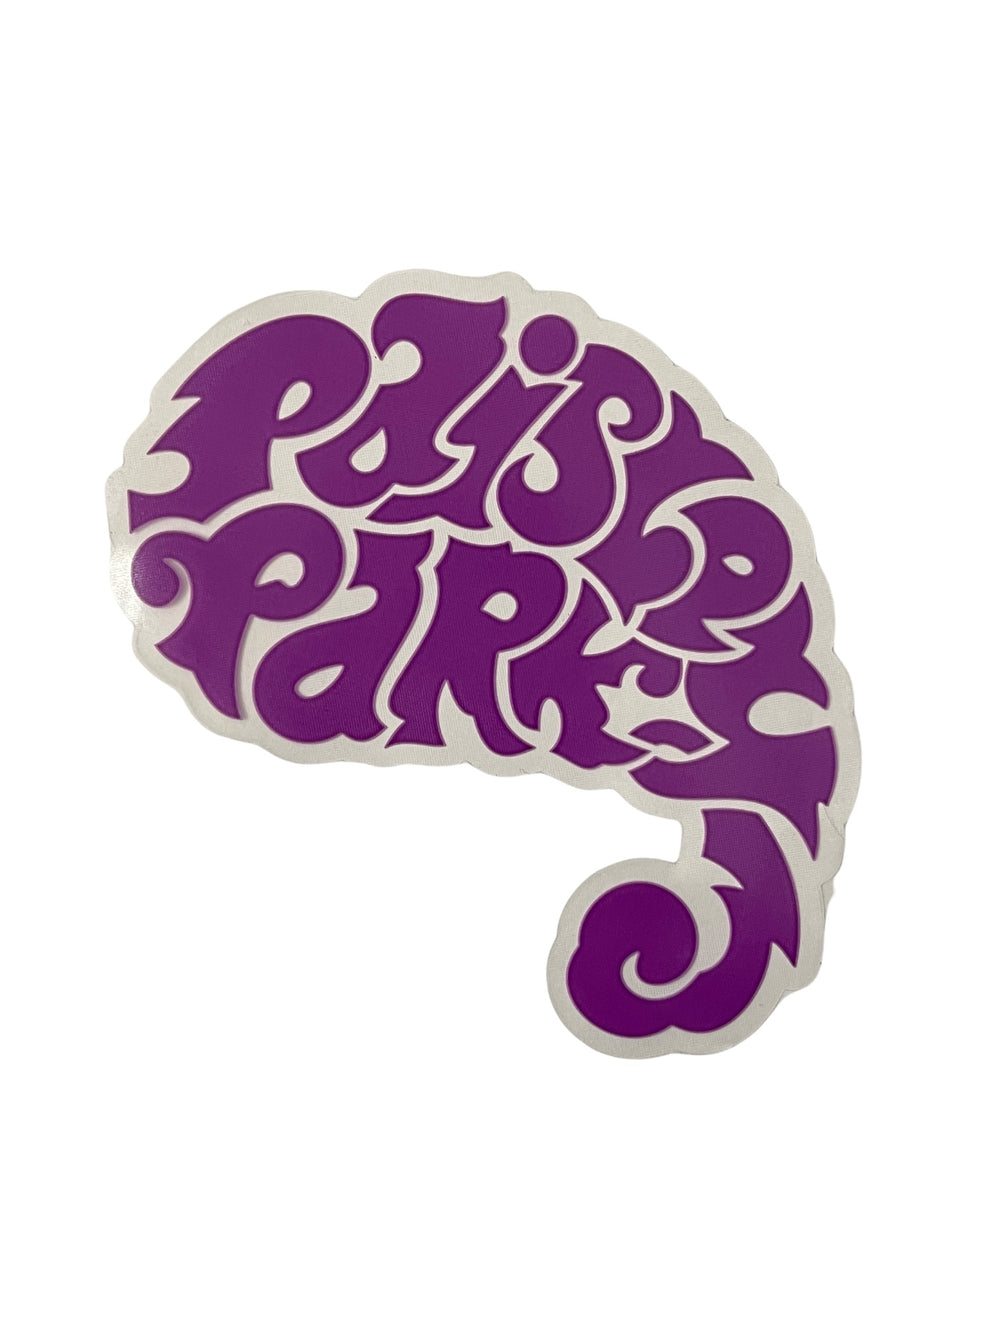 Prince – Paisley Park Official Window Decal Brand New Purple Logo NEW